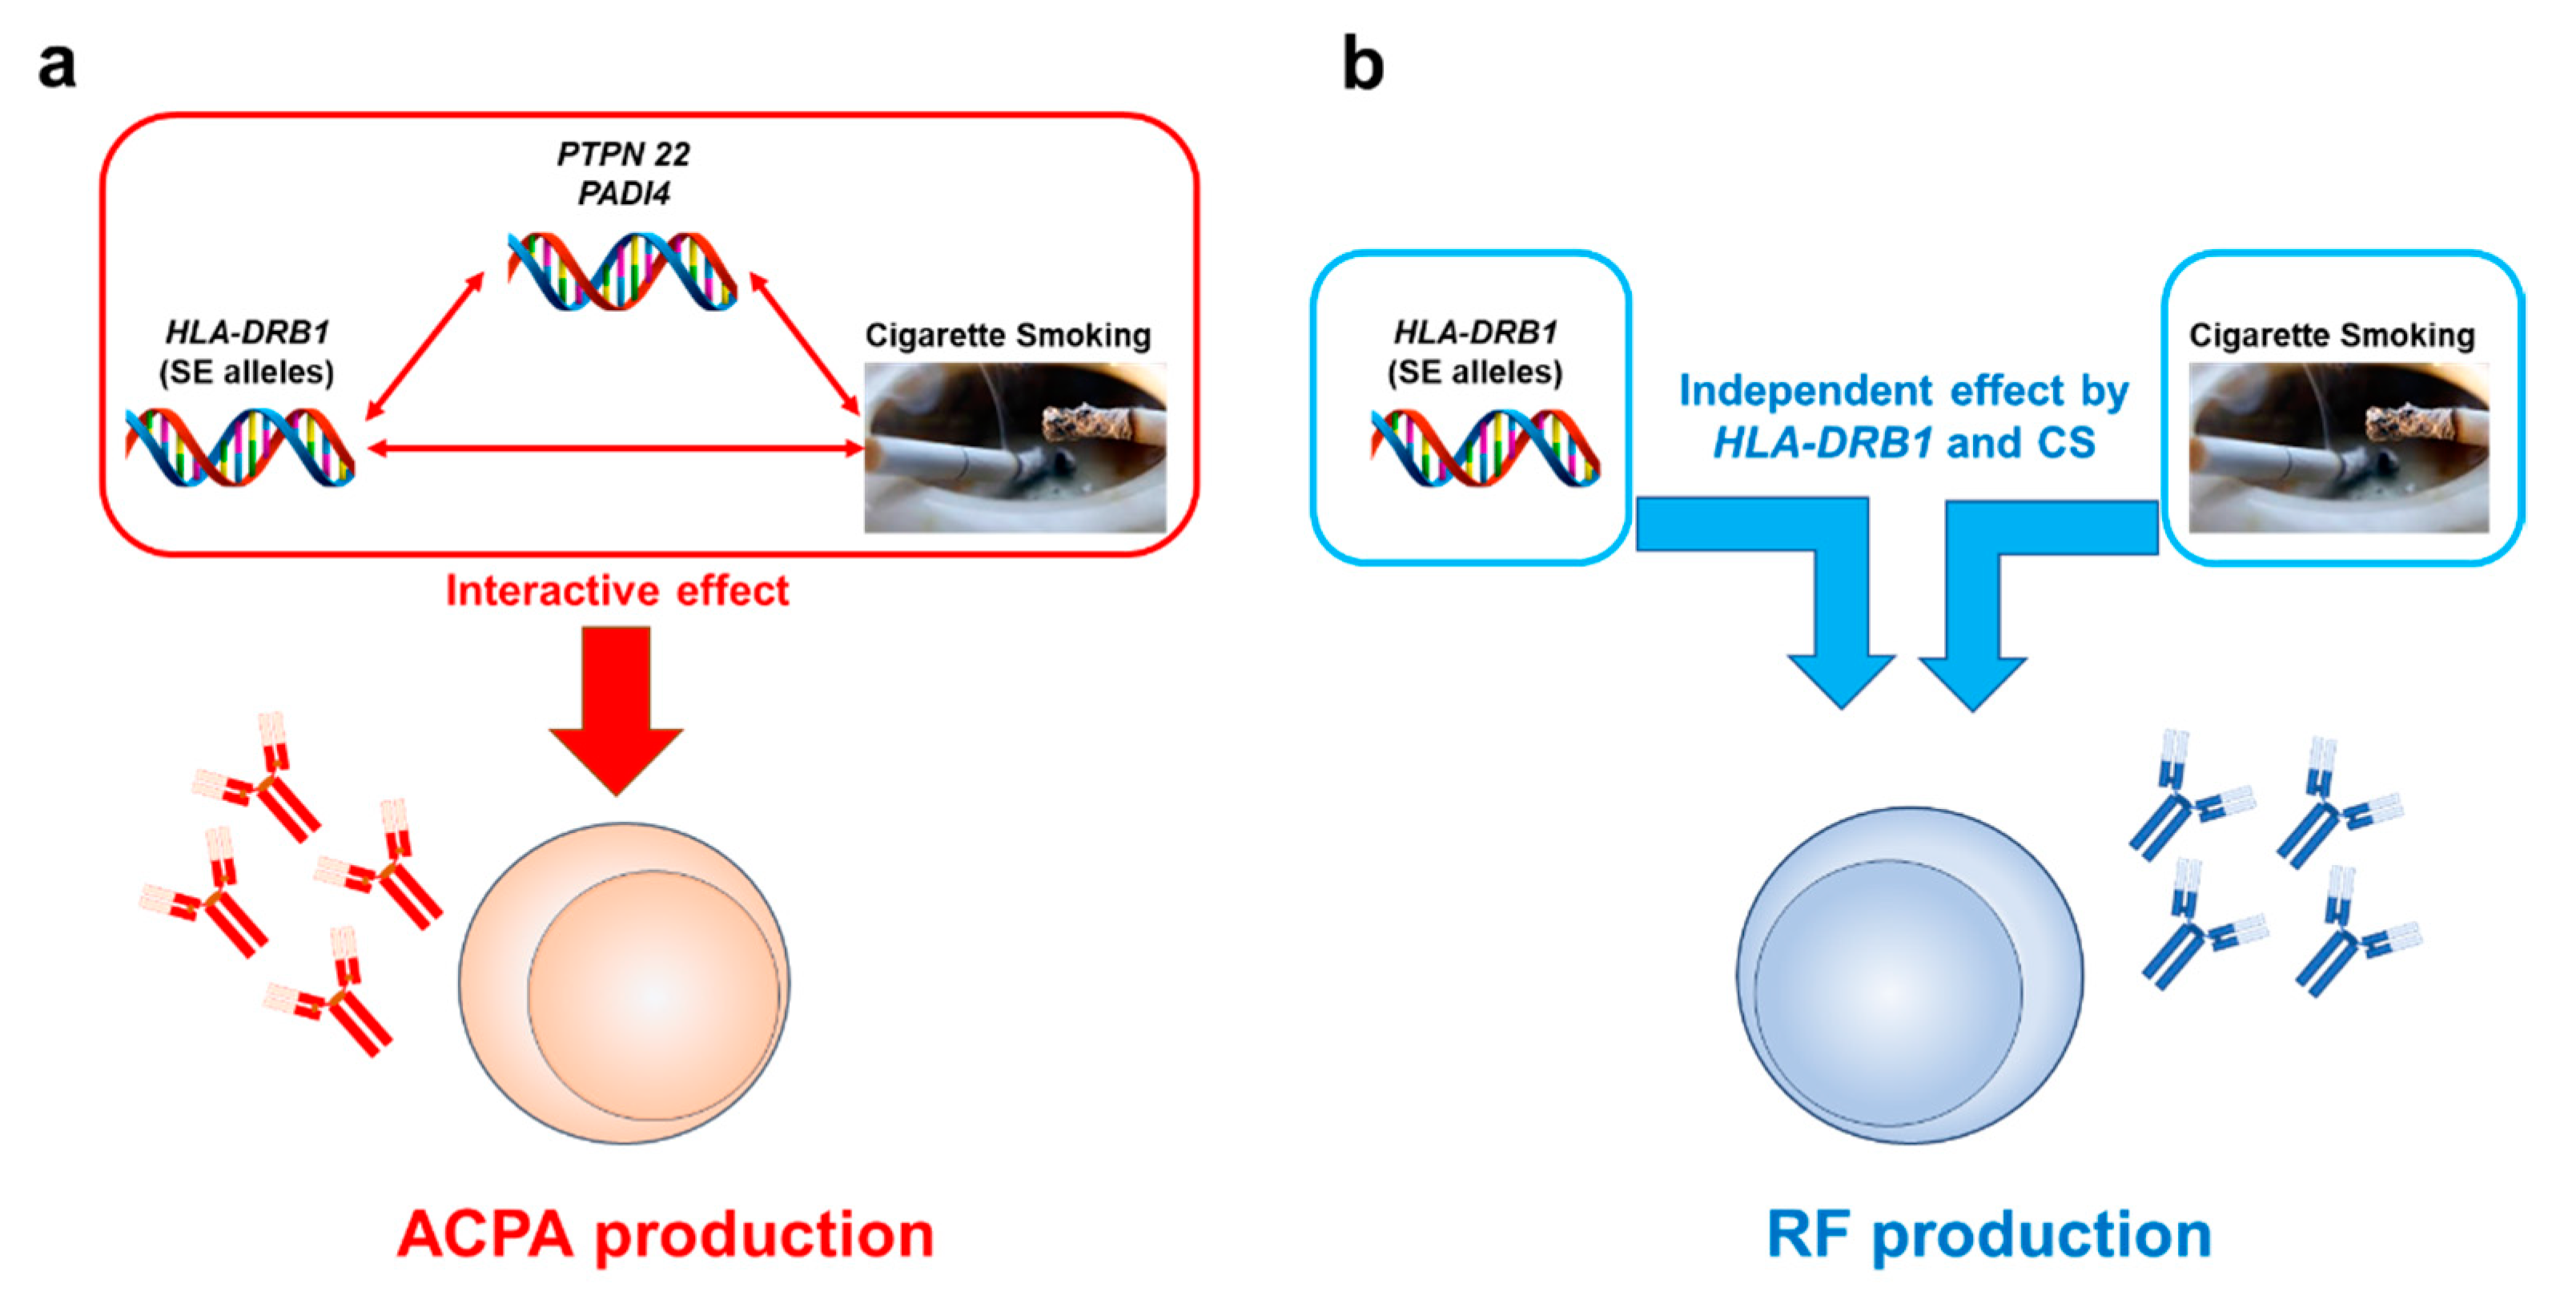 Genetics and inflammatory profile in tobacco dependence